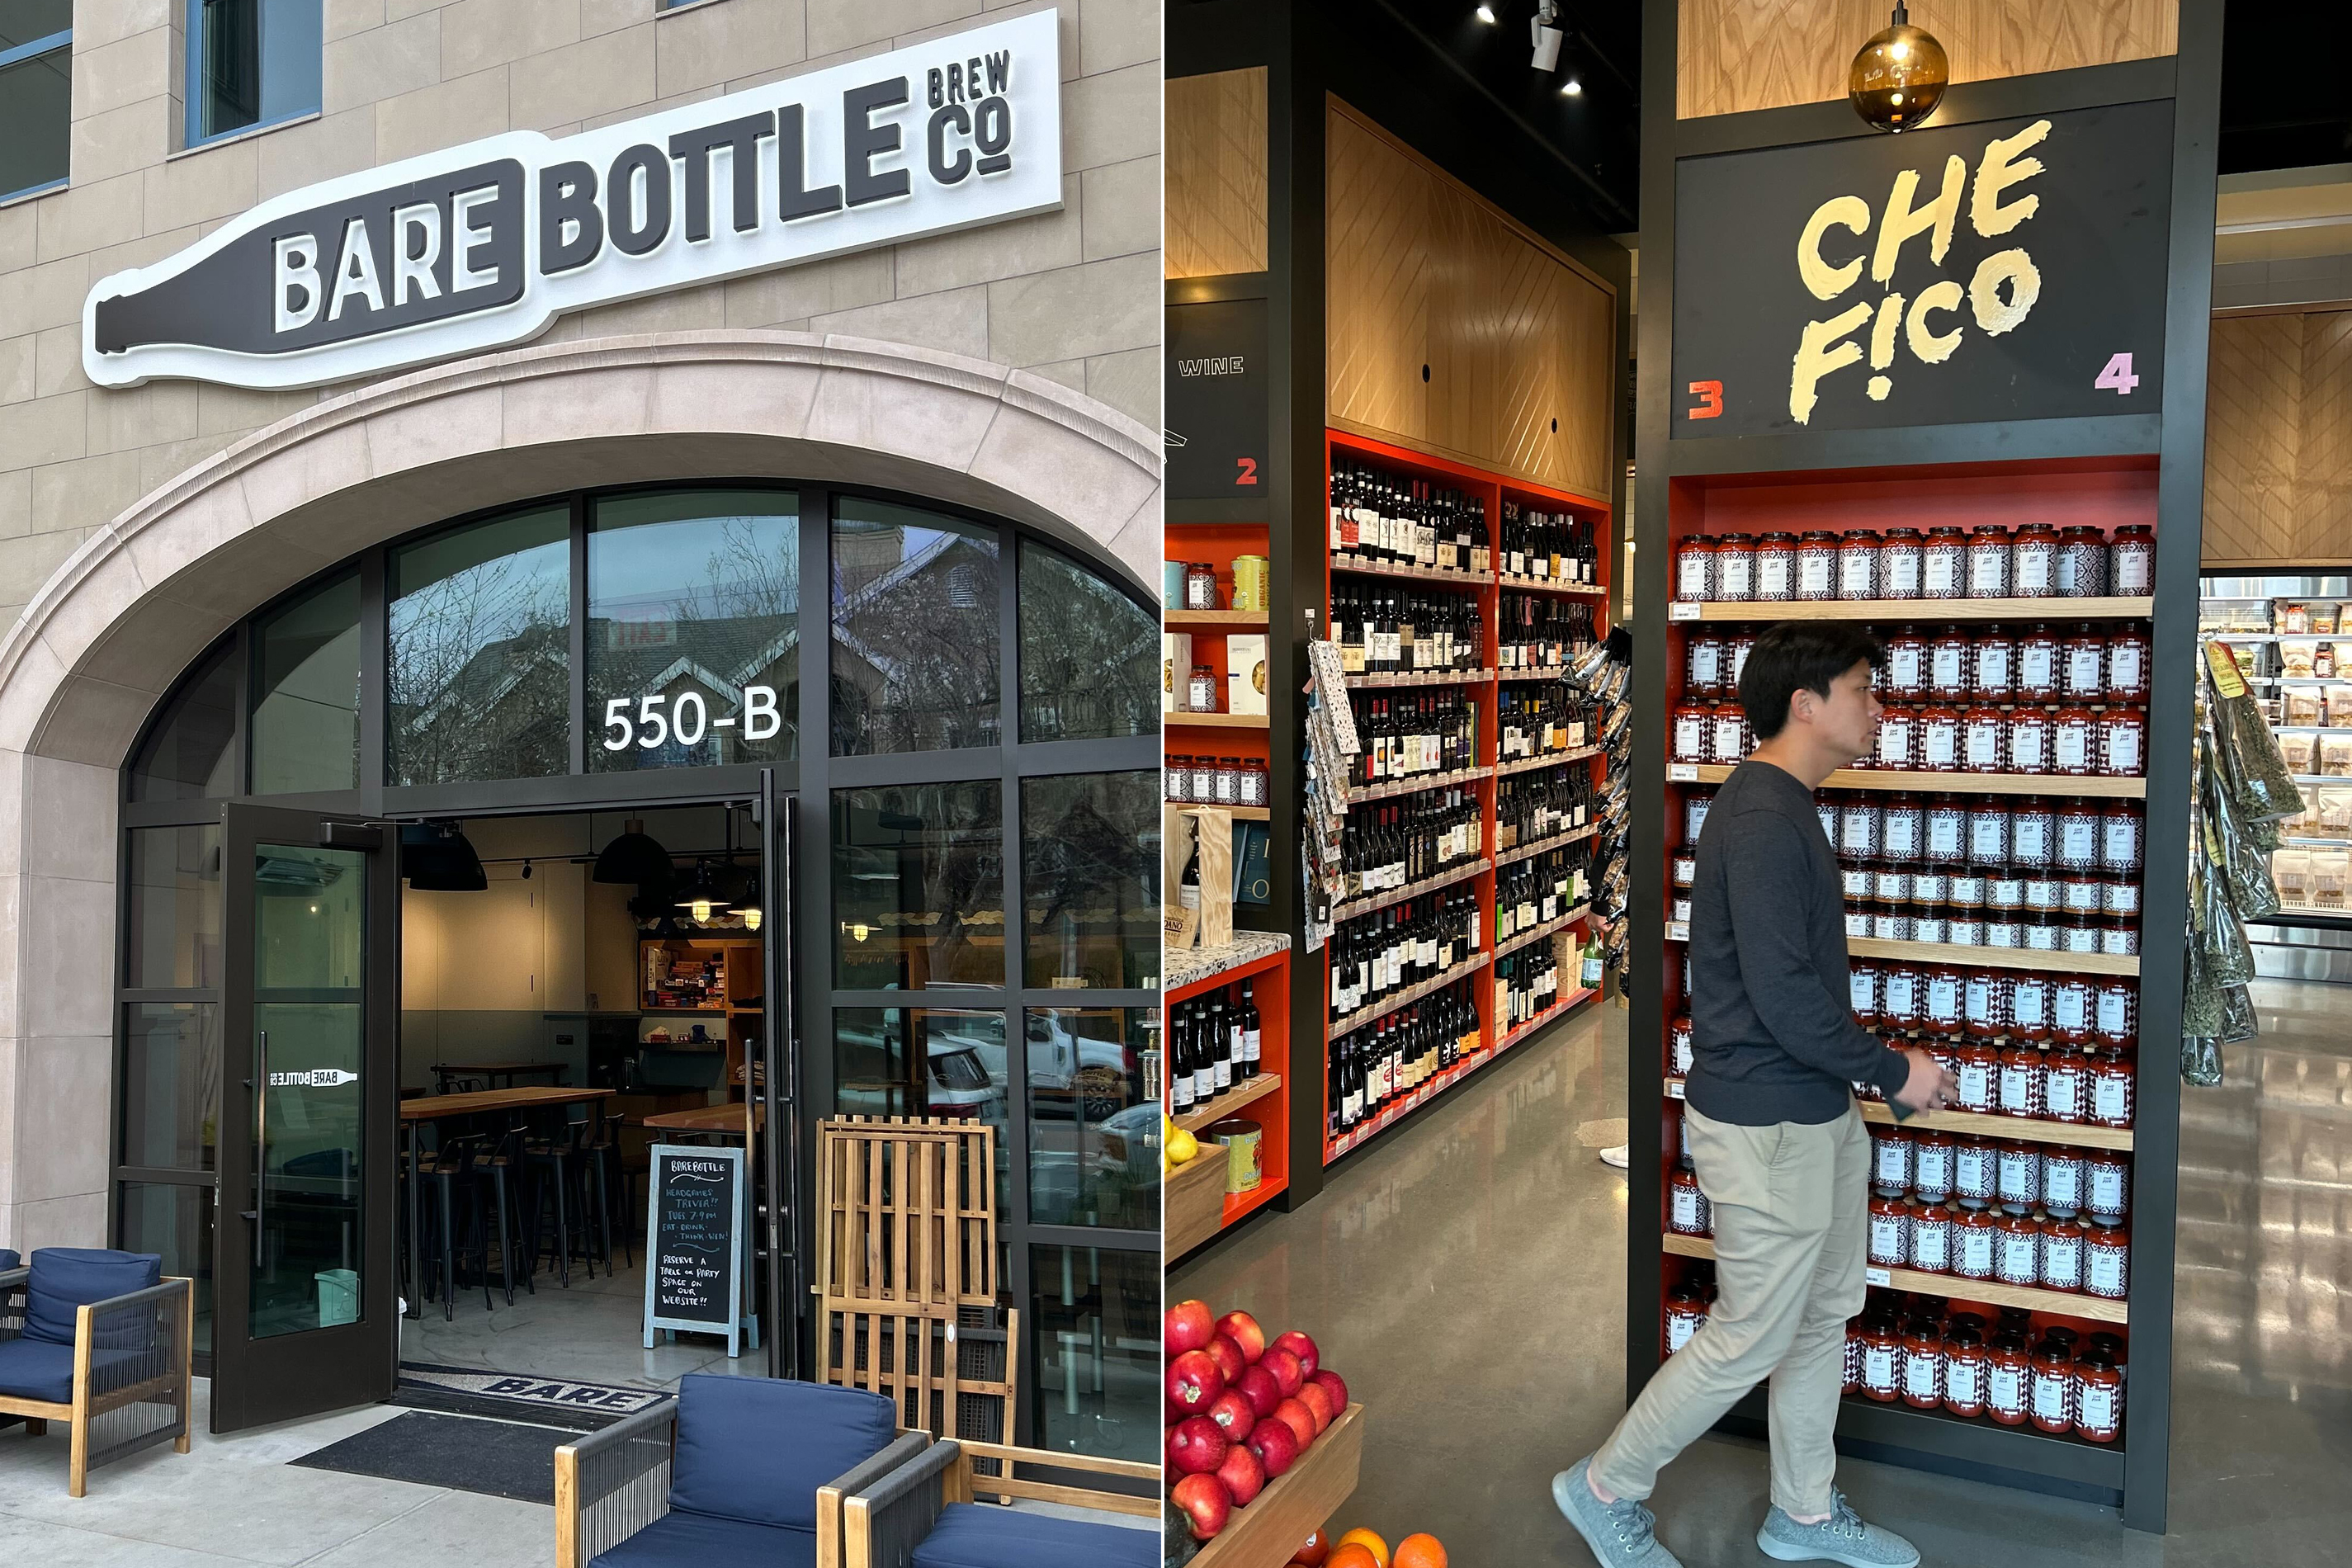 Left: A brewery exterior with a sign &quot;BARE BOTTLE BREW CO&quot;. Right: A man browses shelves with jars and bottles in a store.